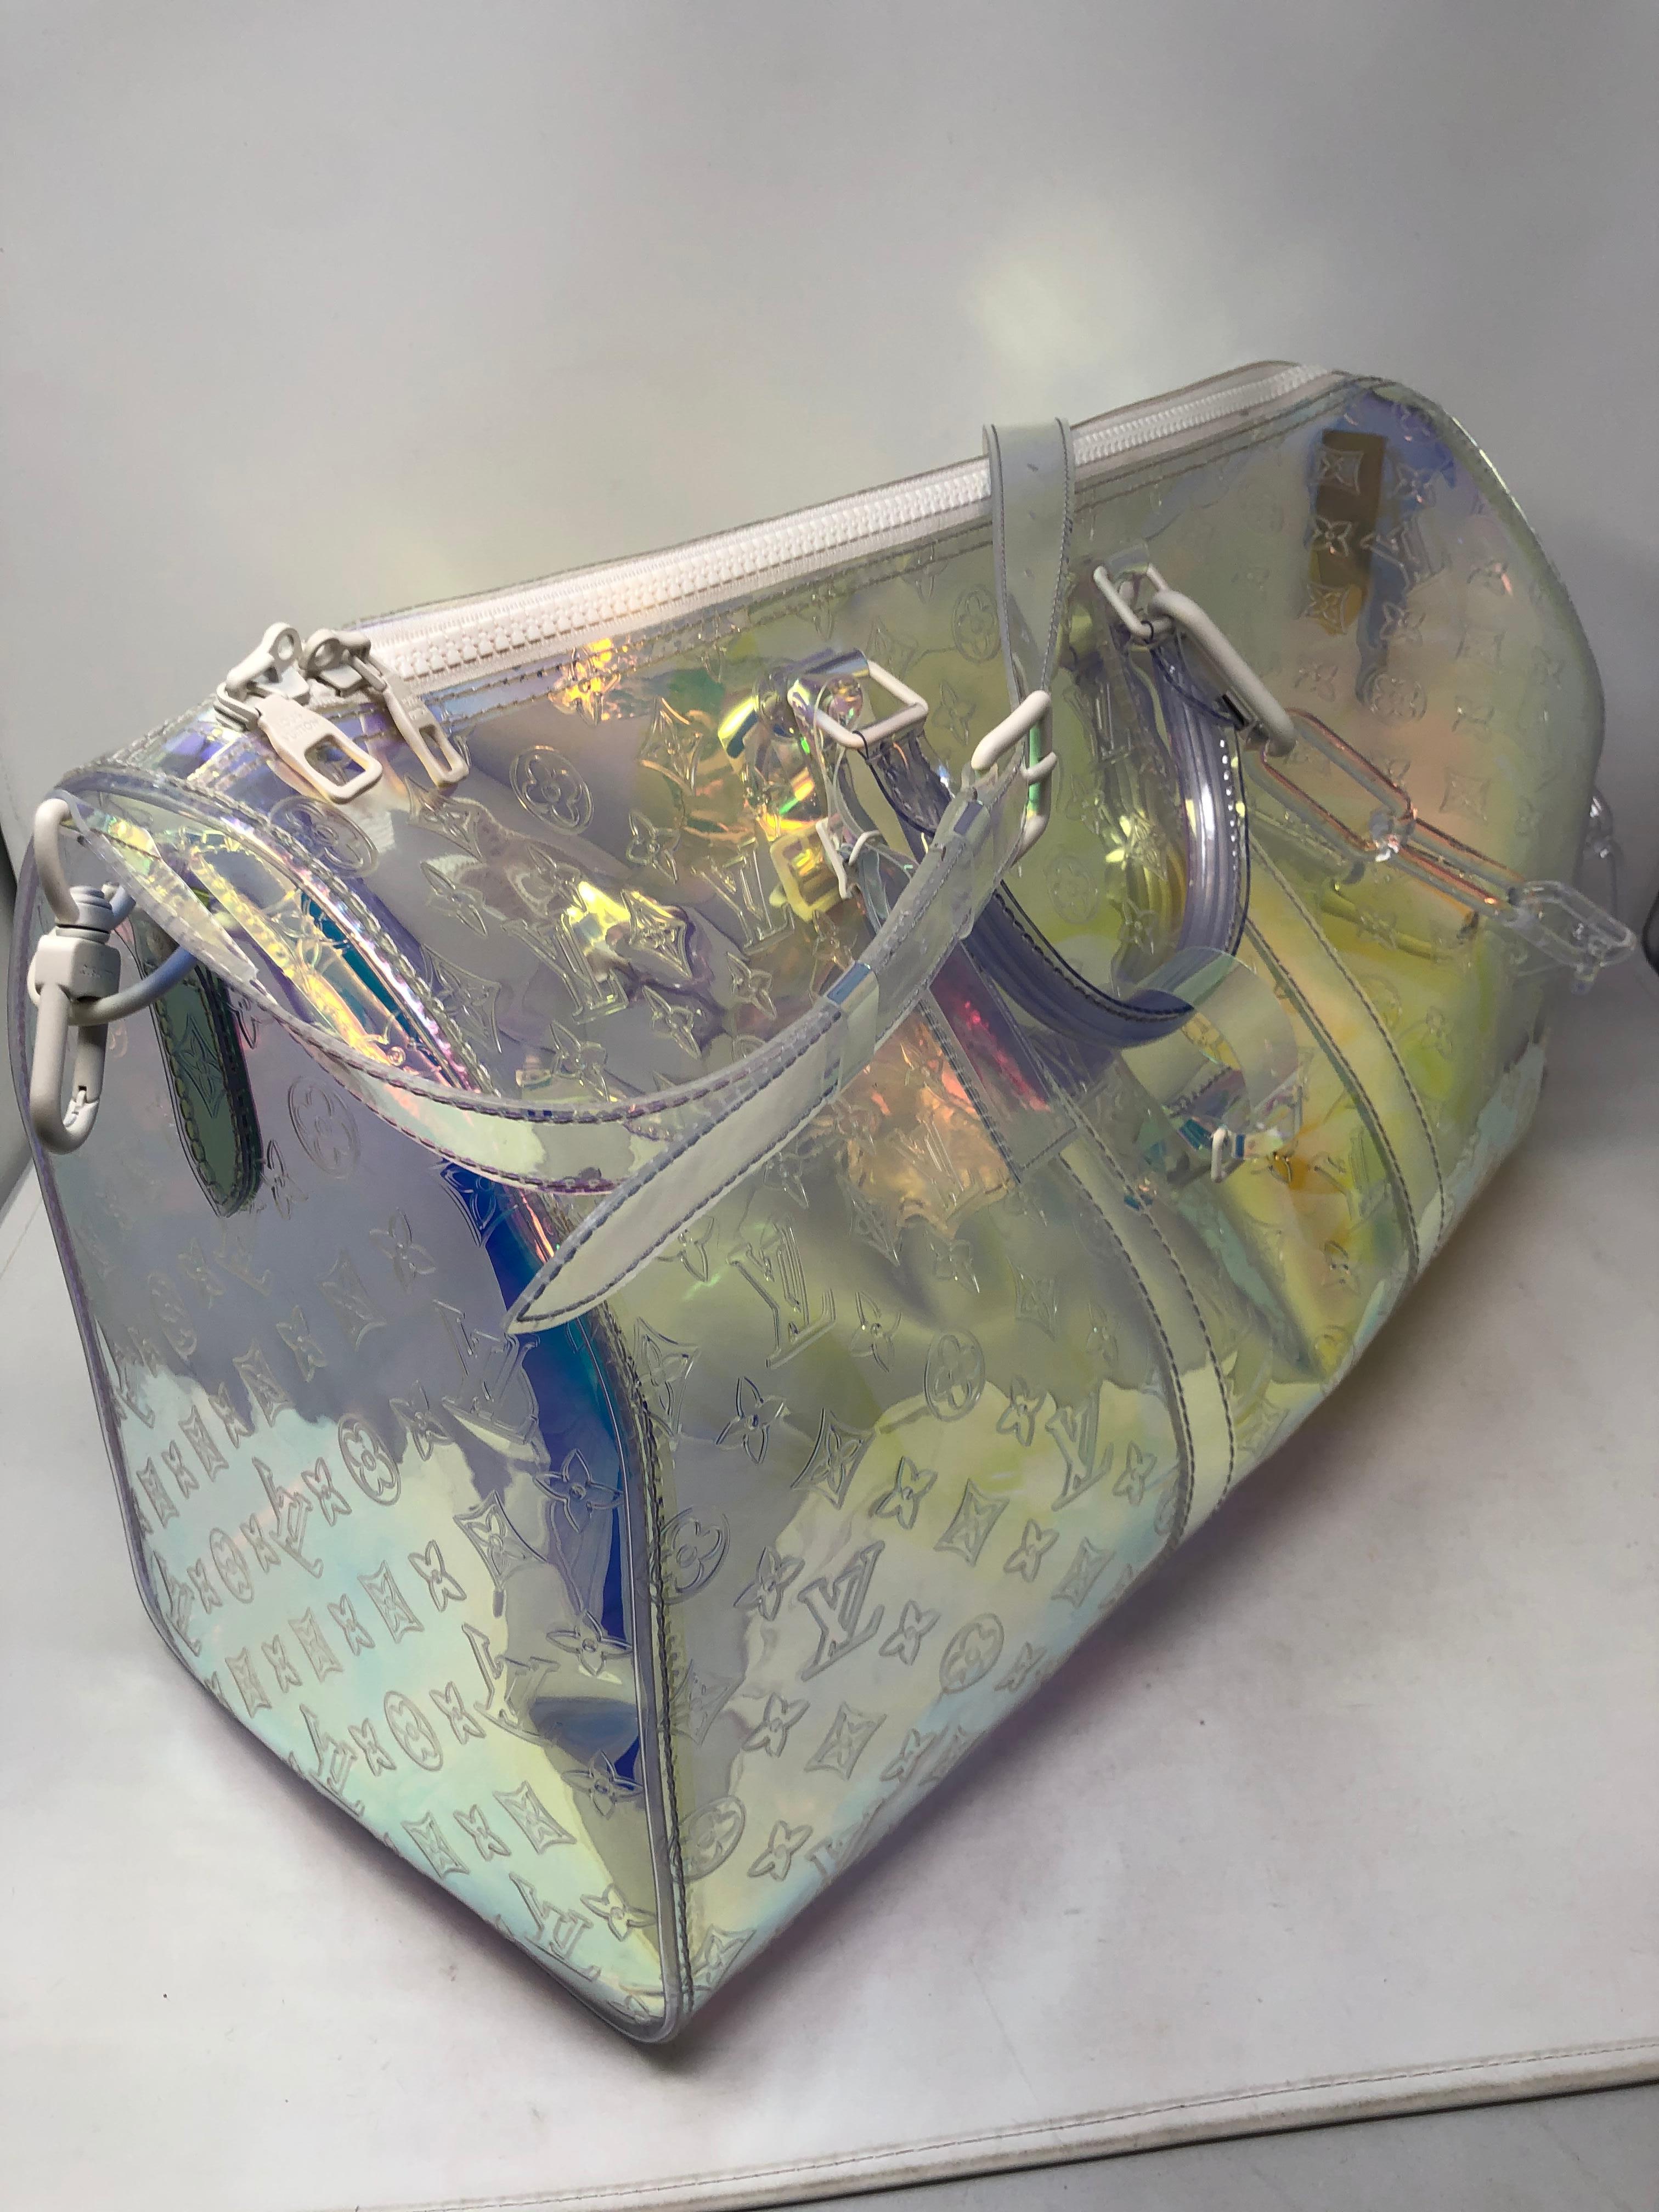 Louis Vuitton Prism Keepall by Virgil Abloh. 50 Keepall Bandouliere with matching strap. Clear and iridescent prism embossed PVC luggage designed by Virgil Abloh. From his first collection at Louis Vuitton. This is a unicorn of designer bags. Brand